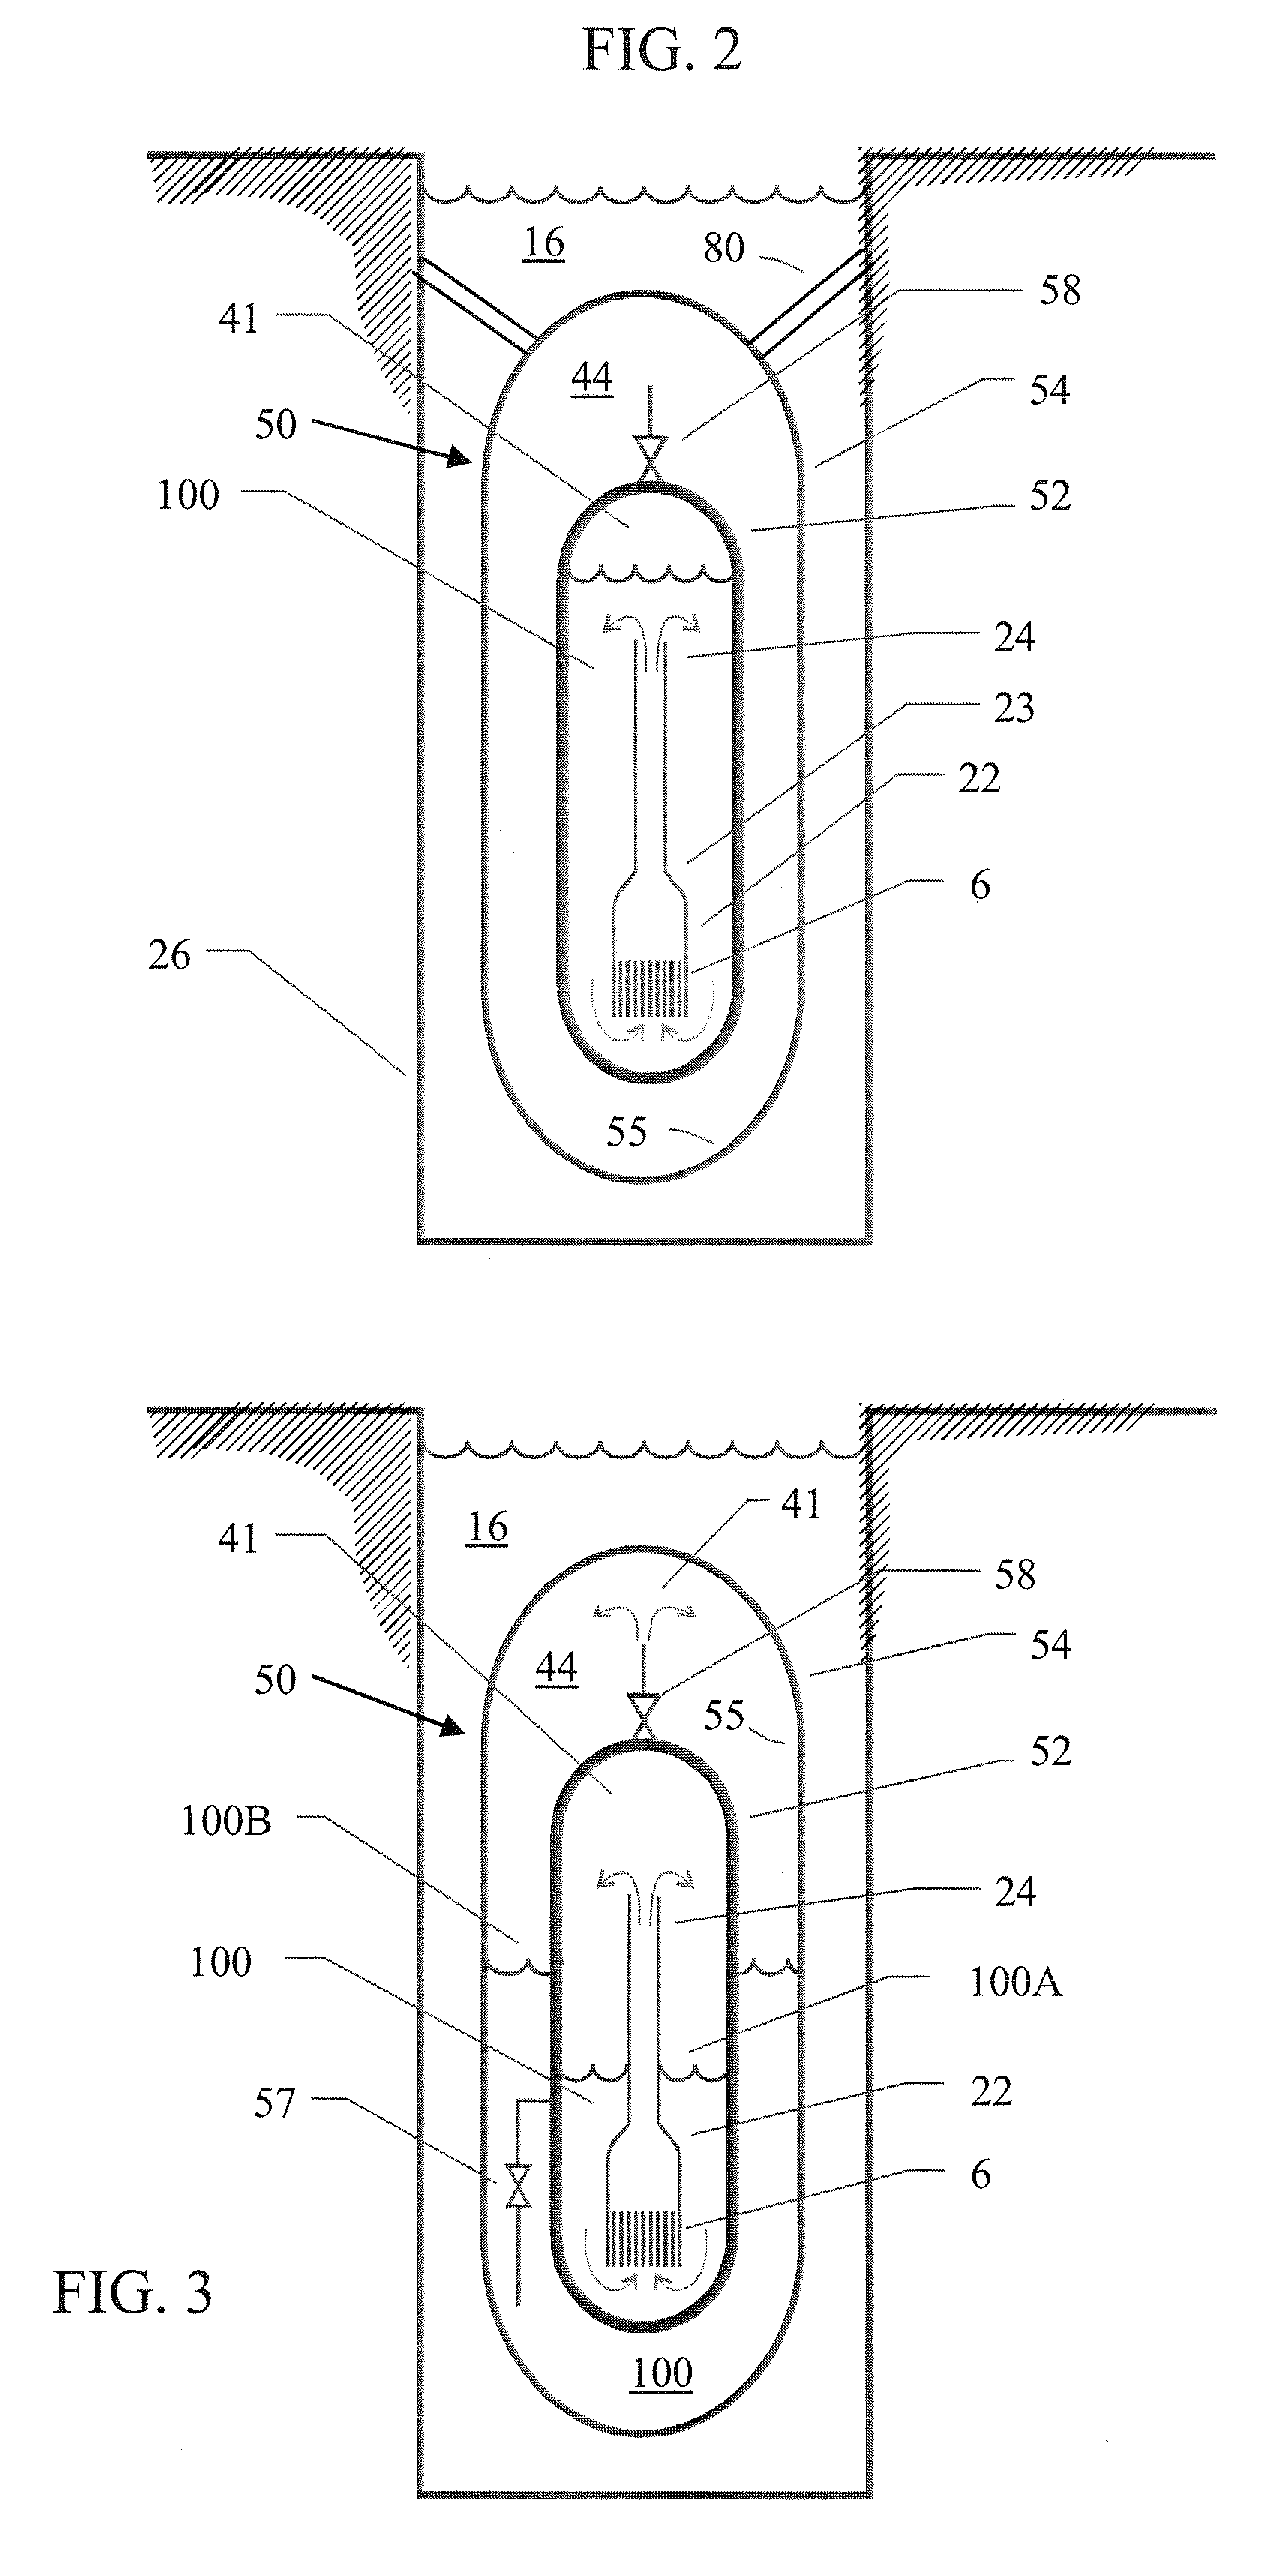 Internal dry containment vessel for a nuclear reactor